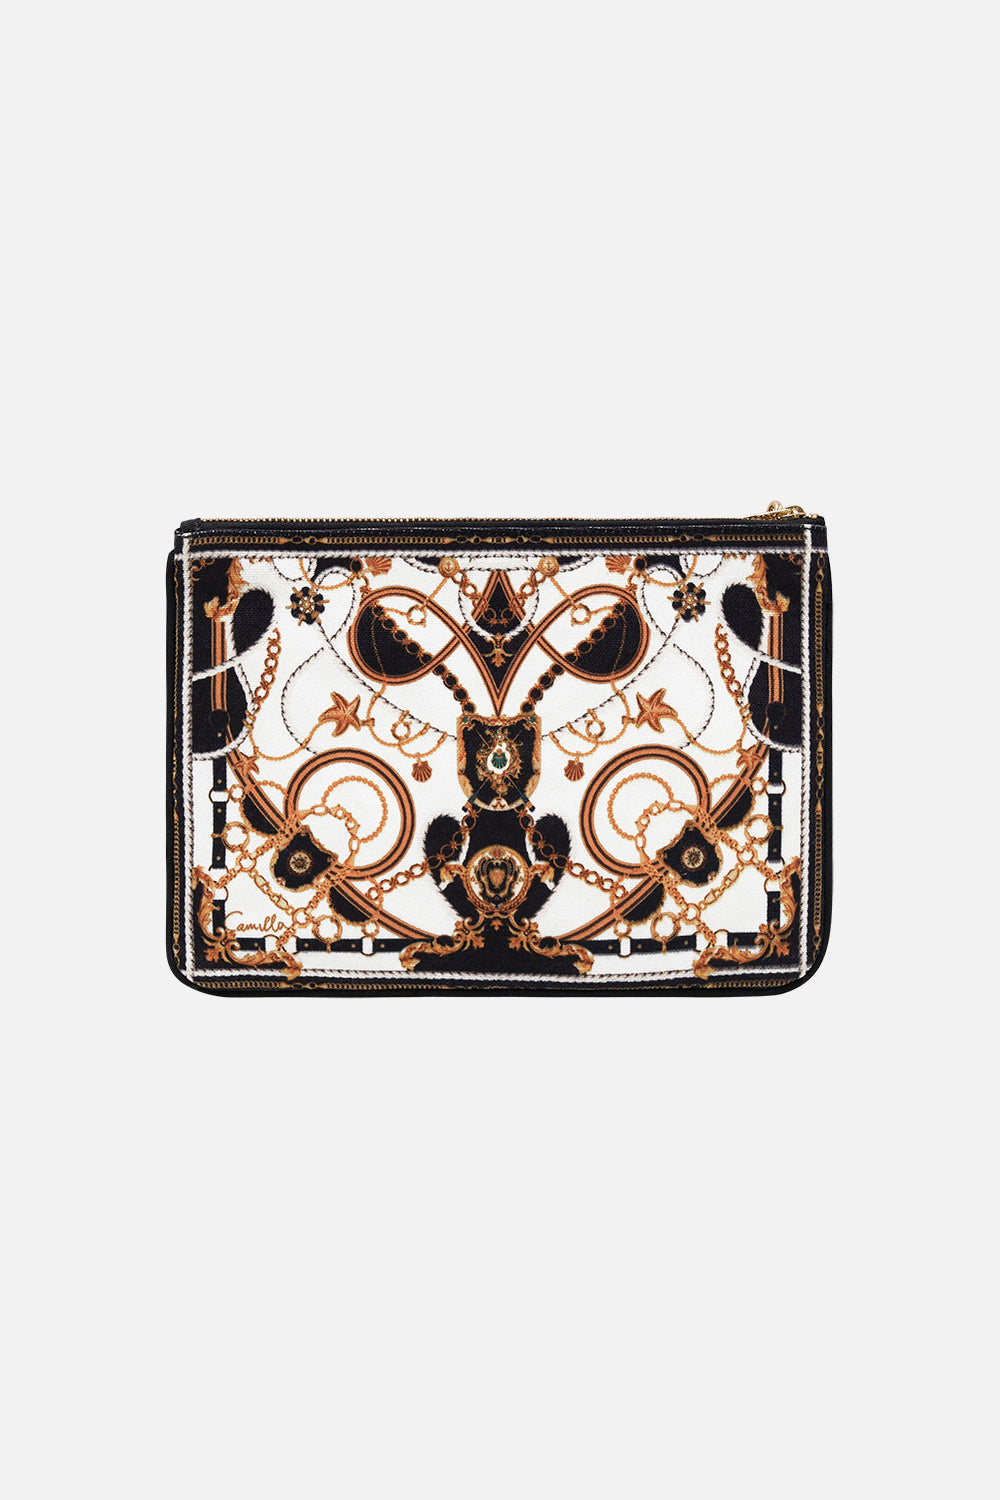 Product view of CAMILLA clutch bag in Sea Charm print 